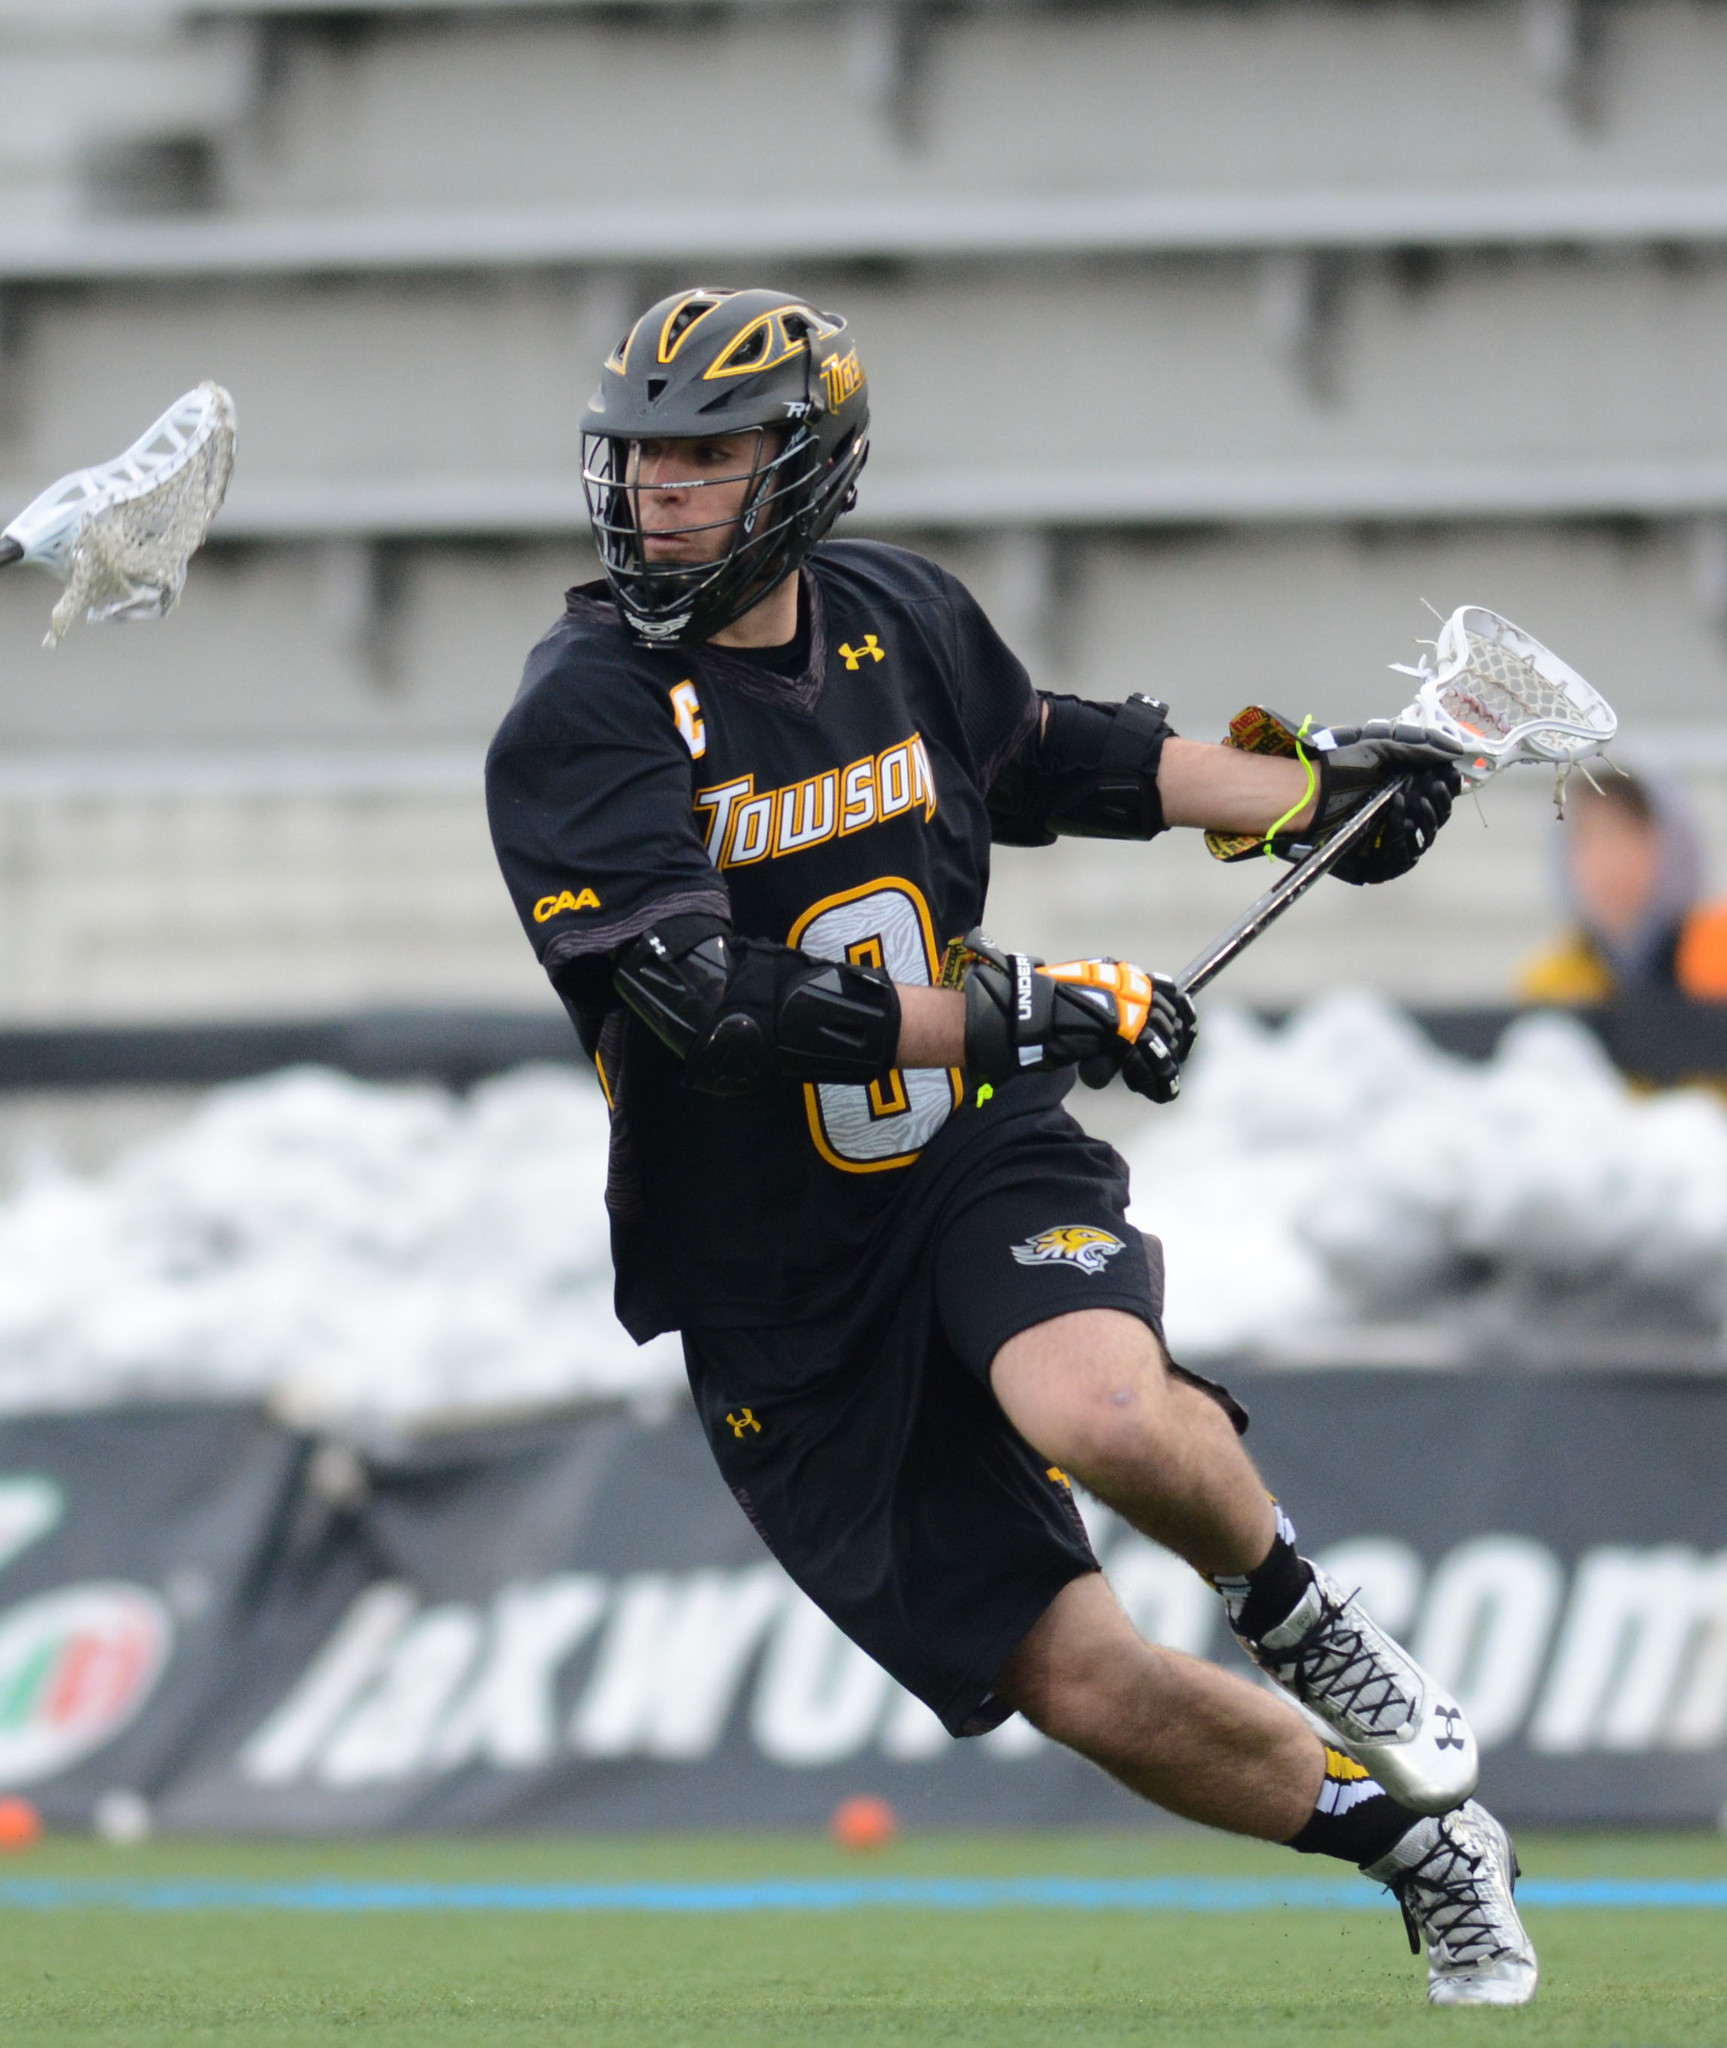 Towson releases their lacrosse schedule as a playlist